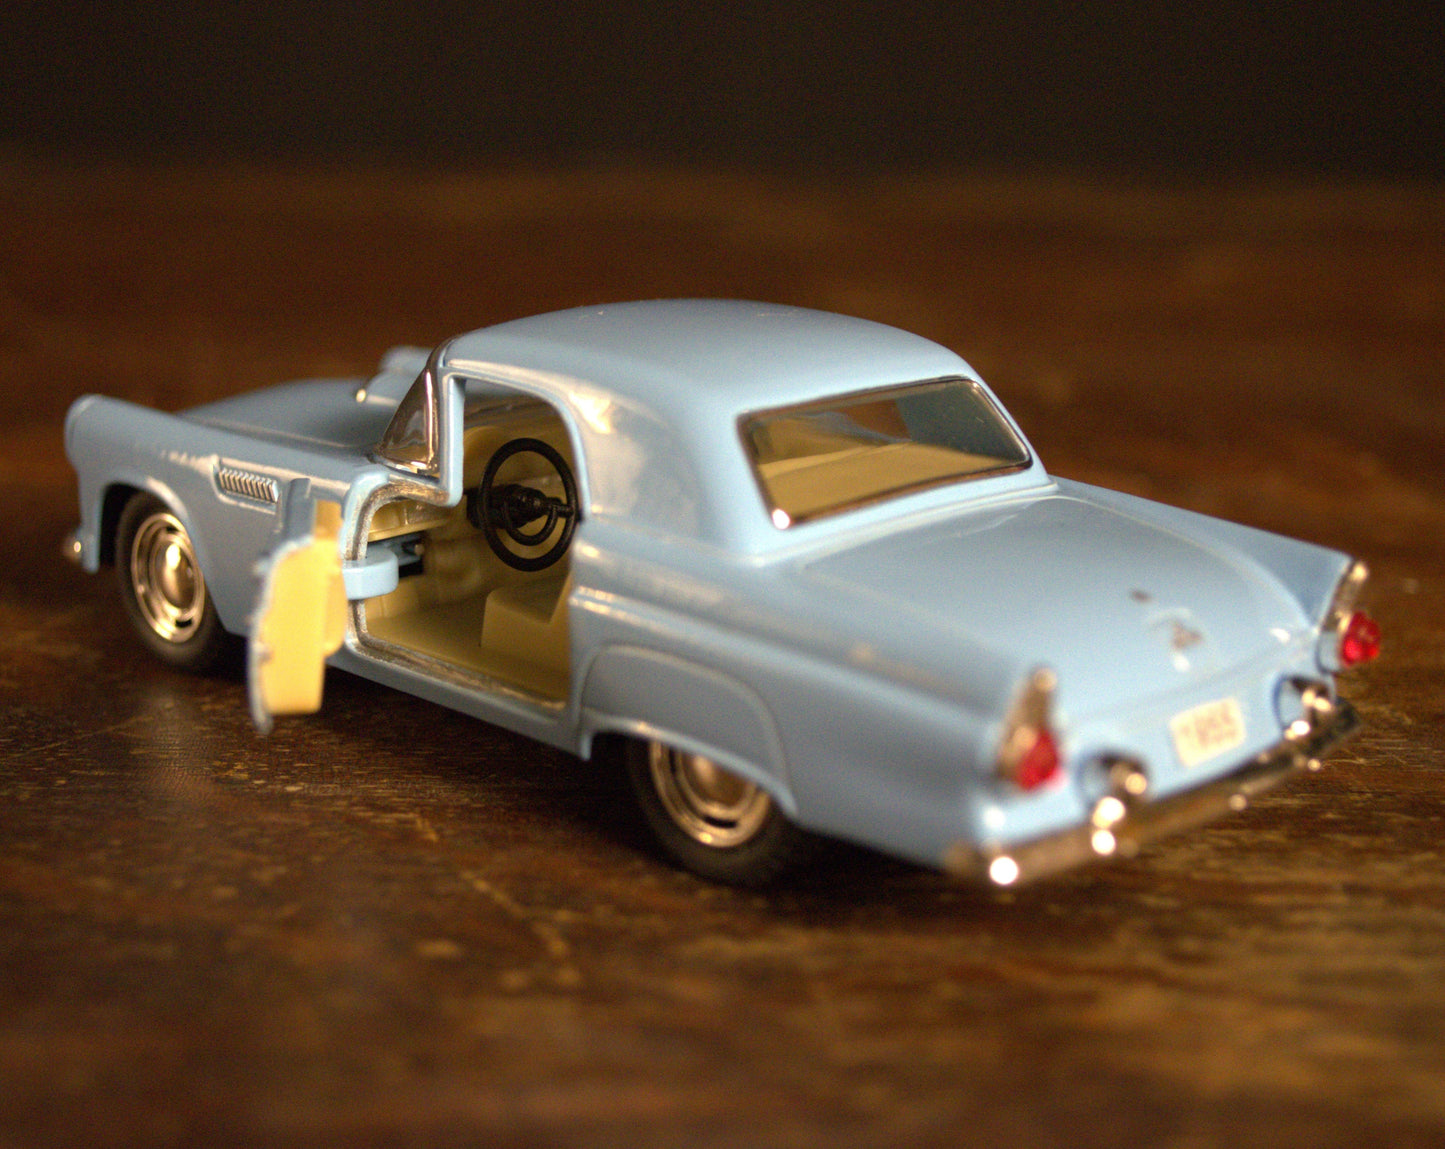 1955 Ford Thunderbird Die Cast 1/36 Scale